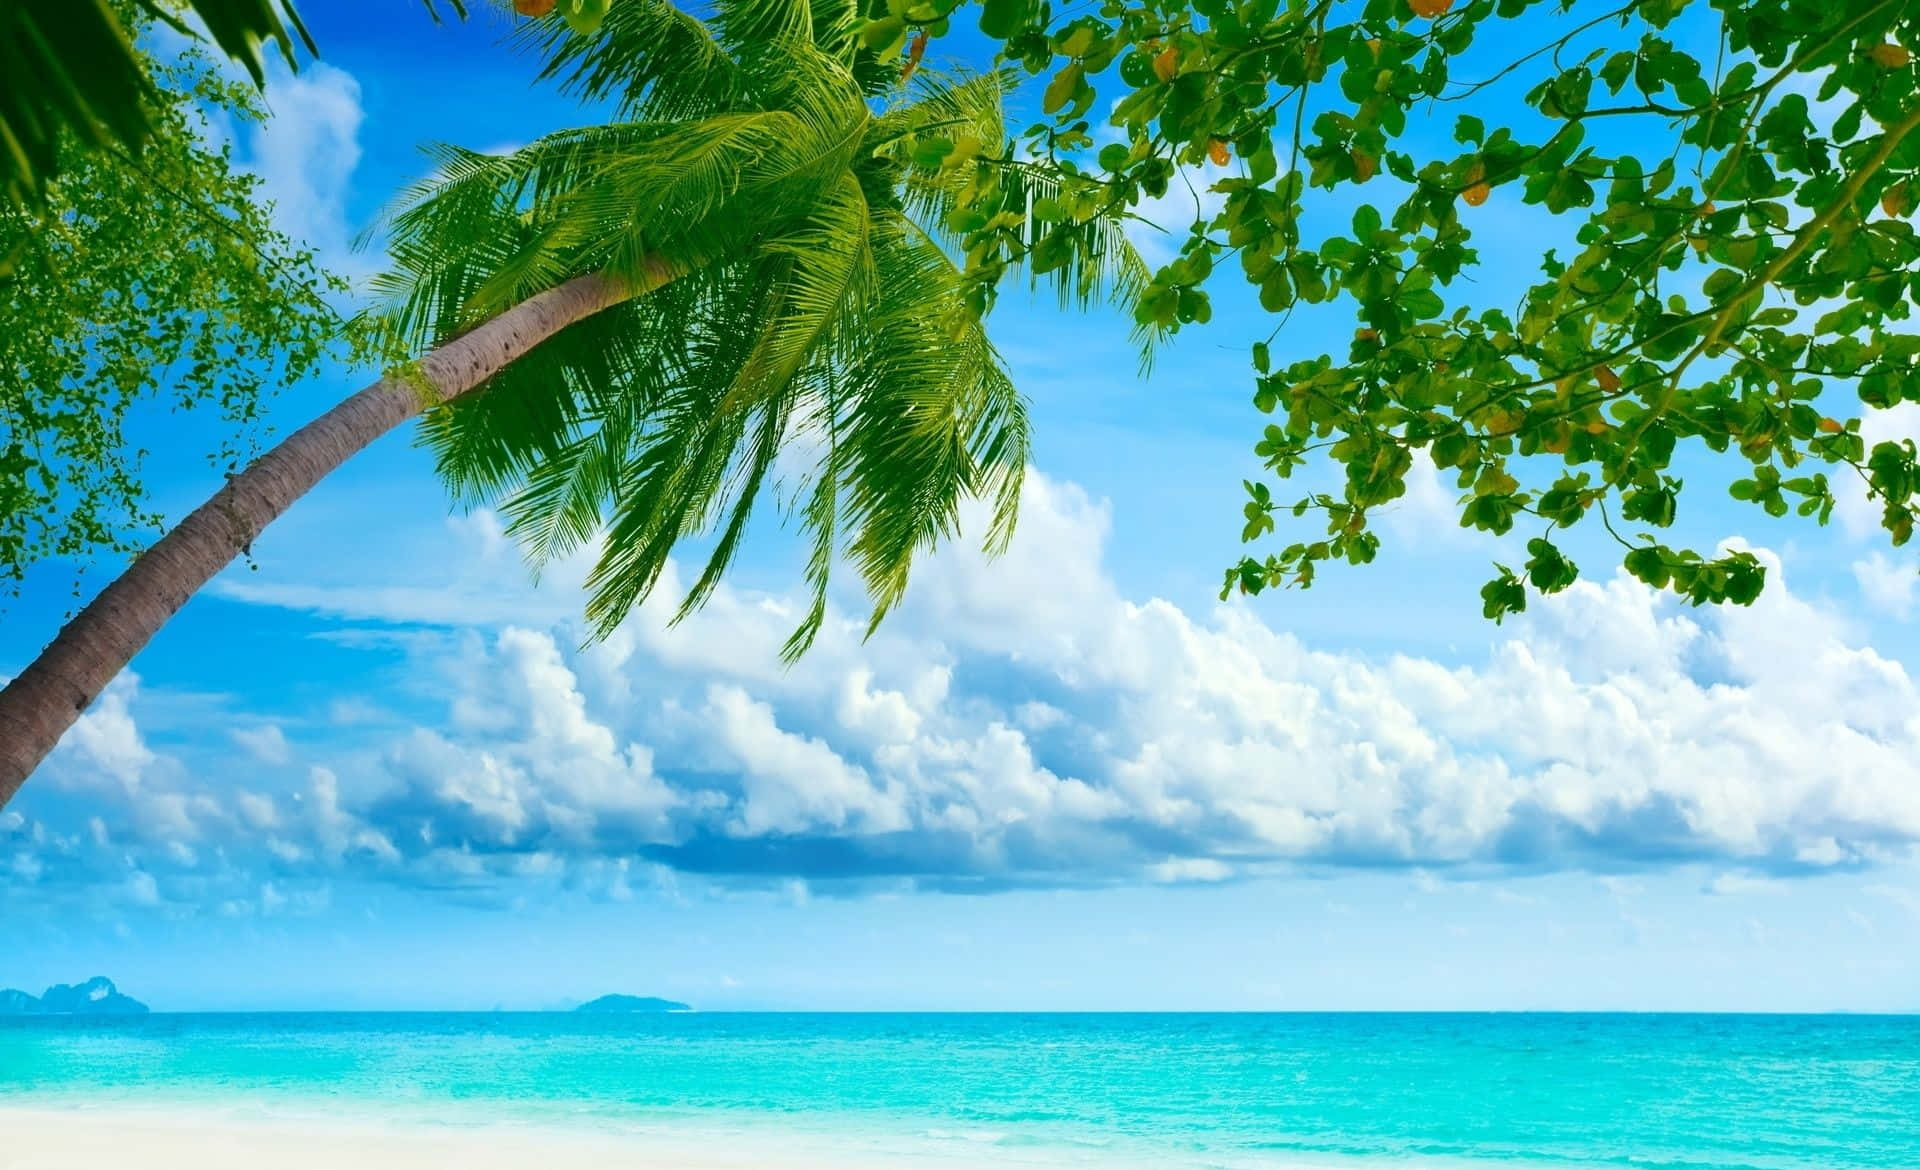 Green Leaves Beach Themed Background